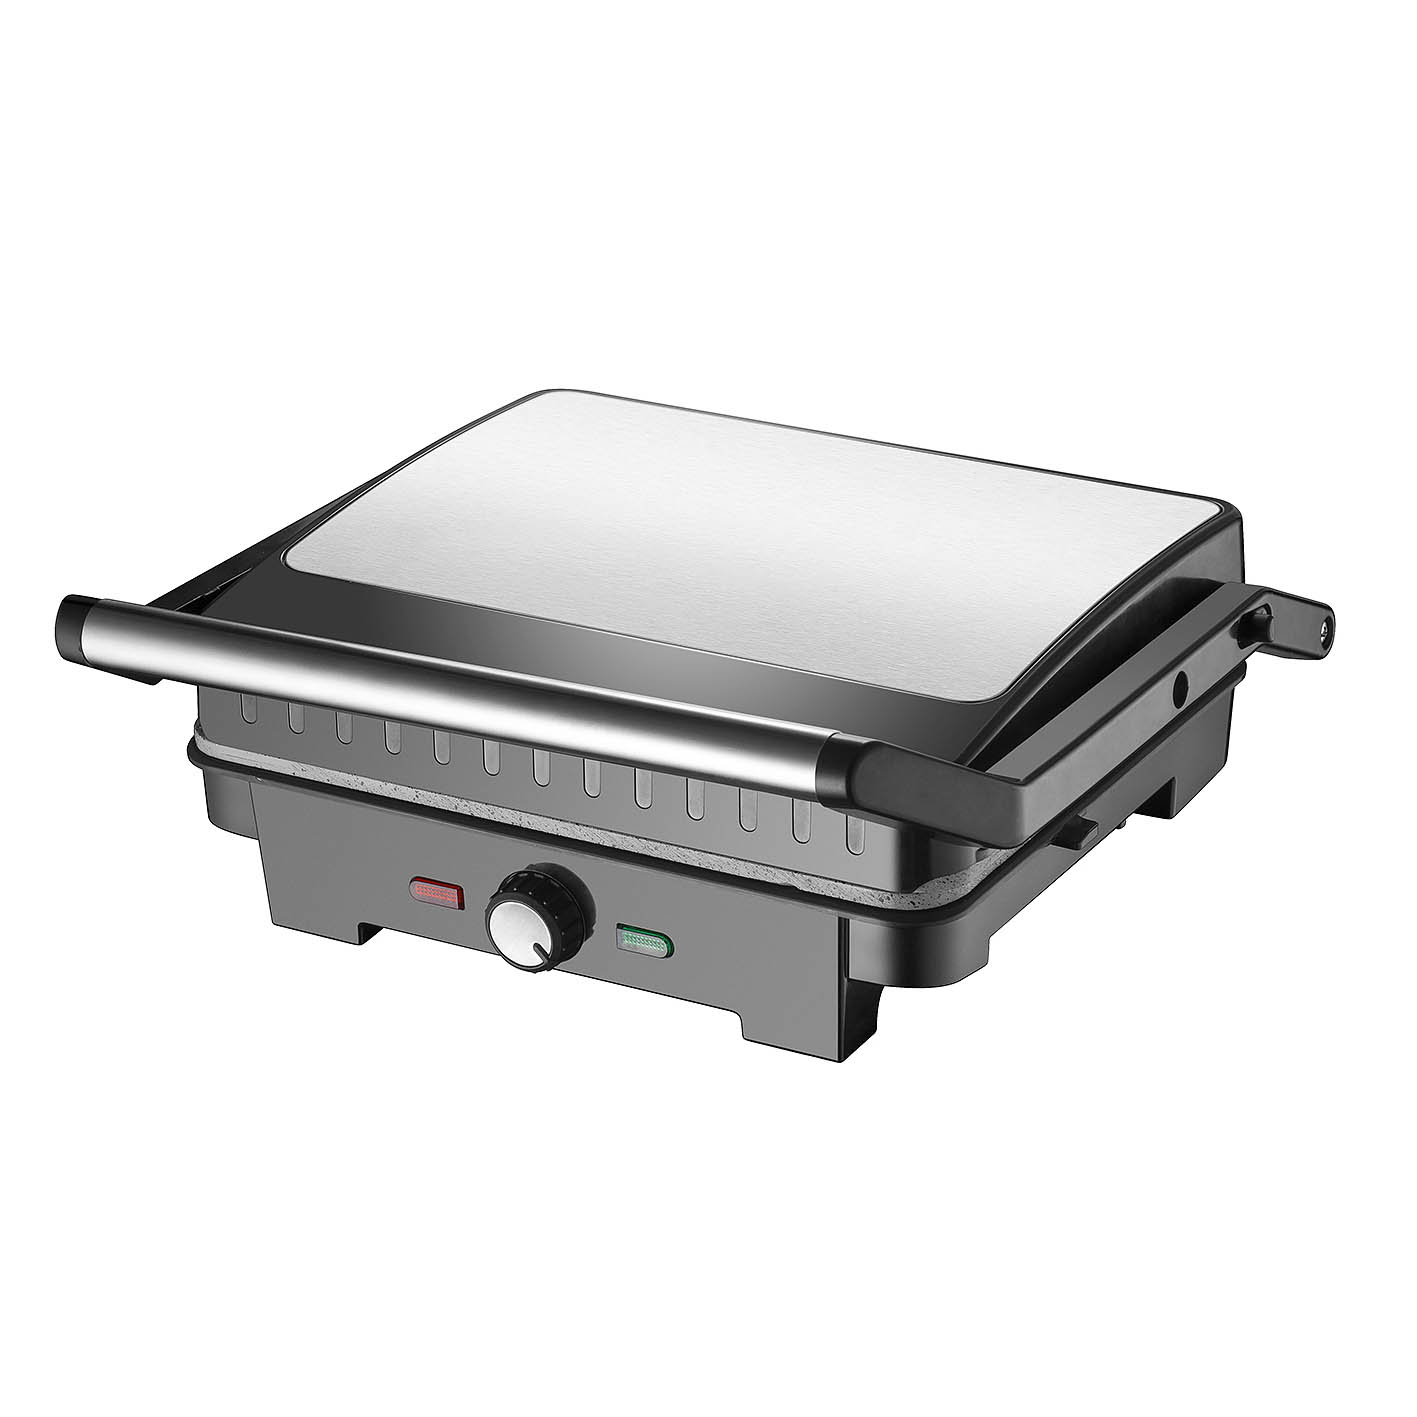 CG-011 Electric Grill